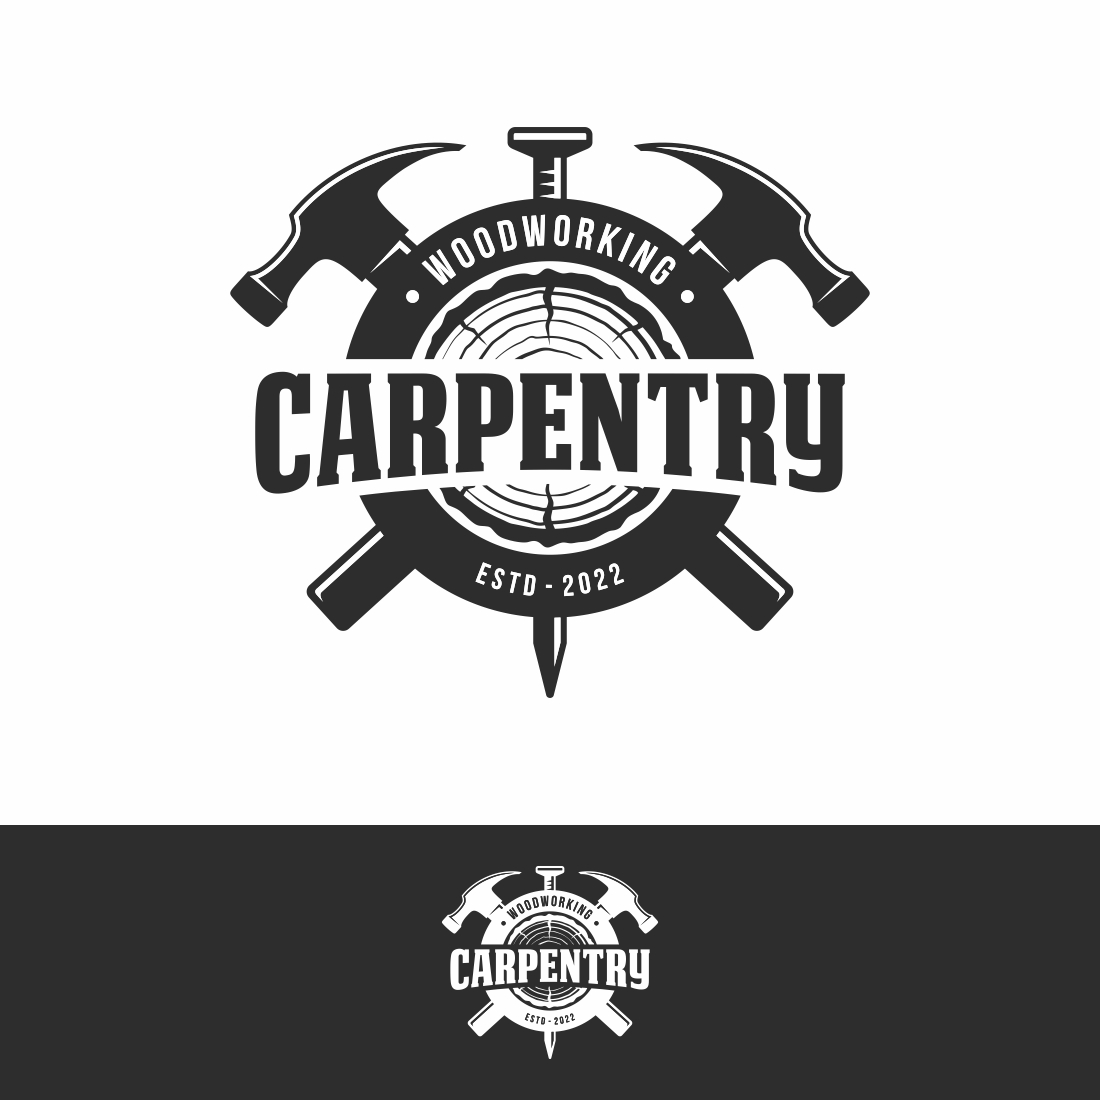 Carpentry vintage logo design template – Only $6 preview image.